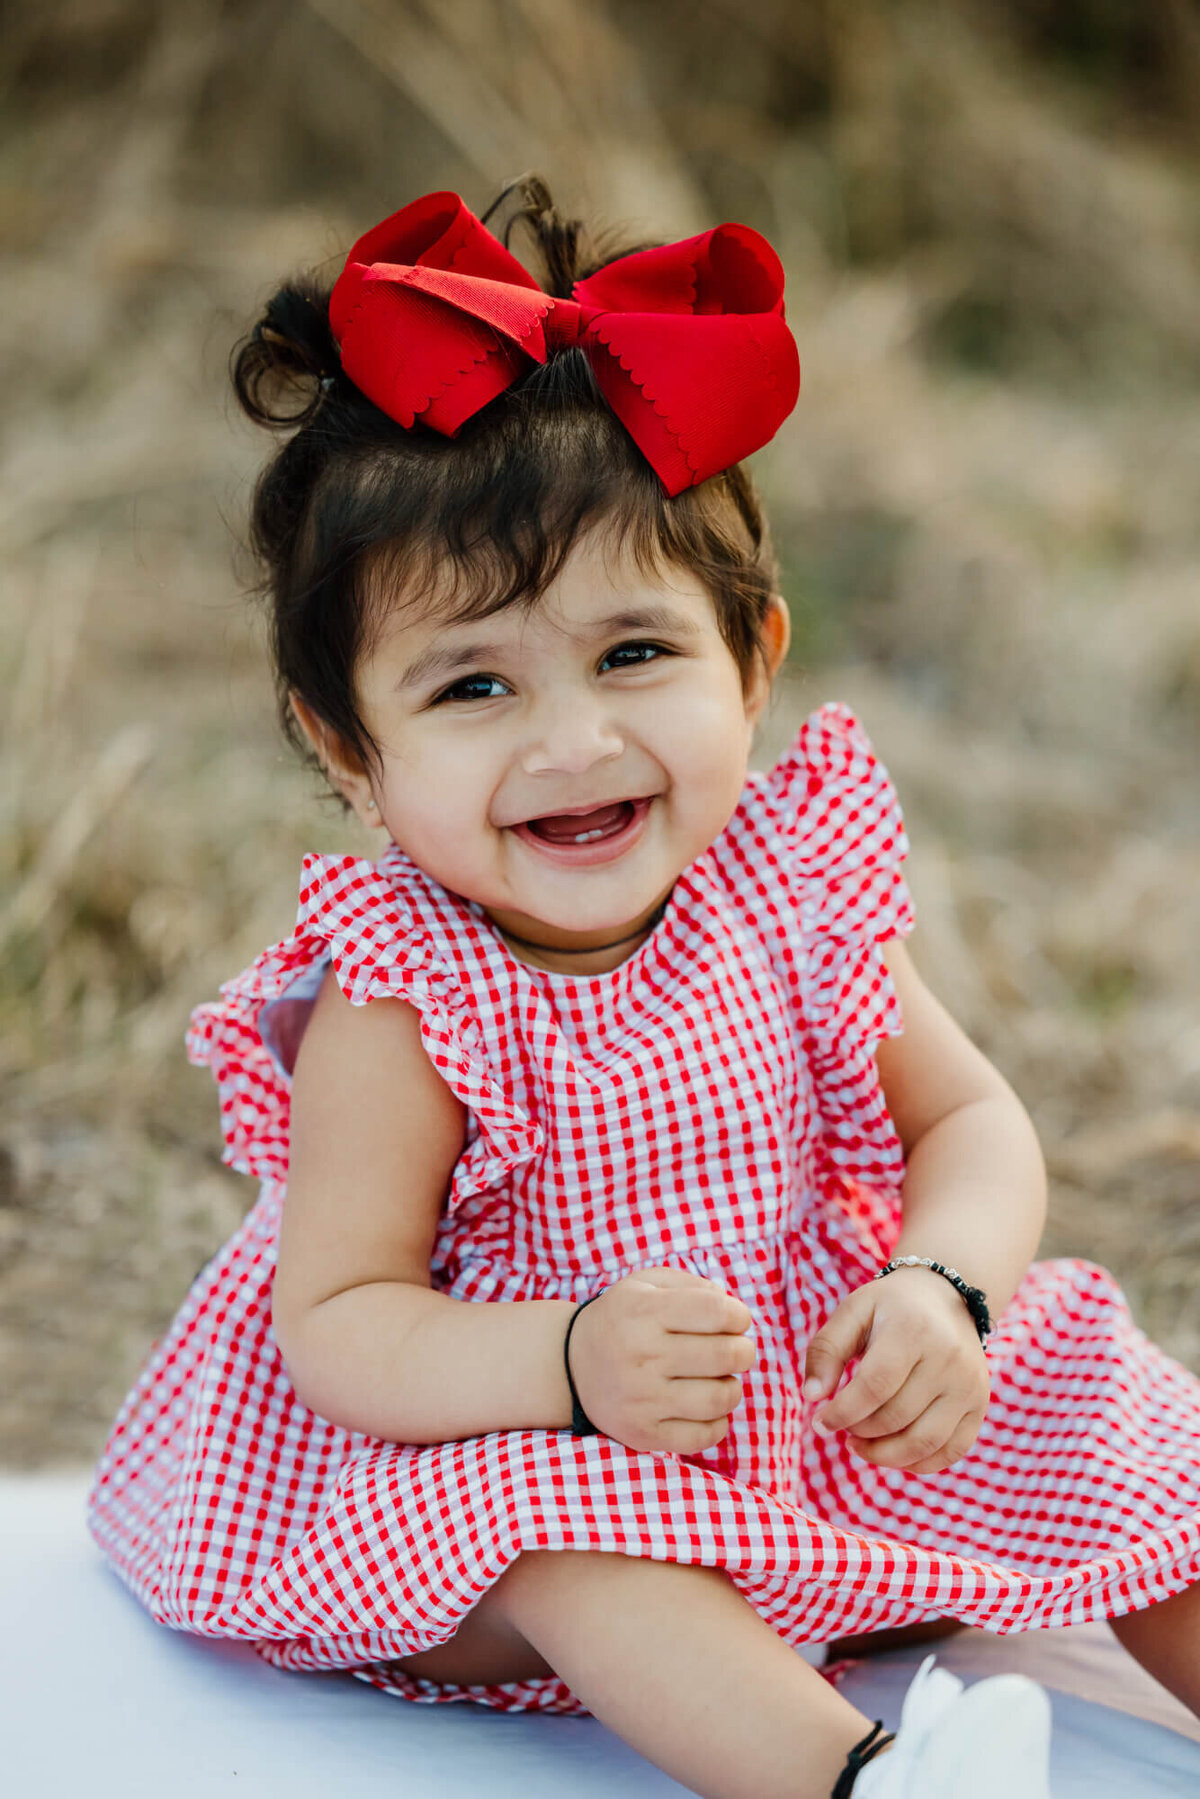 1st birthday image of smiling baby girl wearing read and white checkered dress and red bow